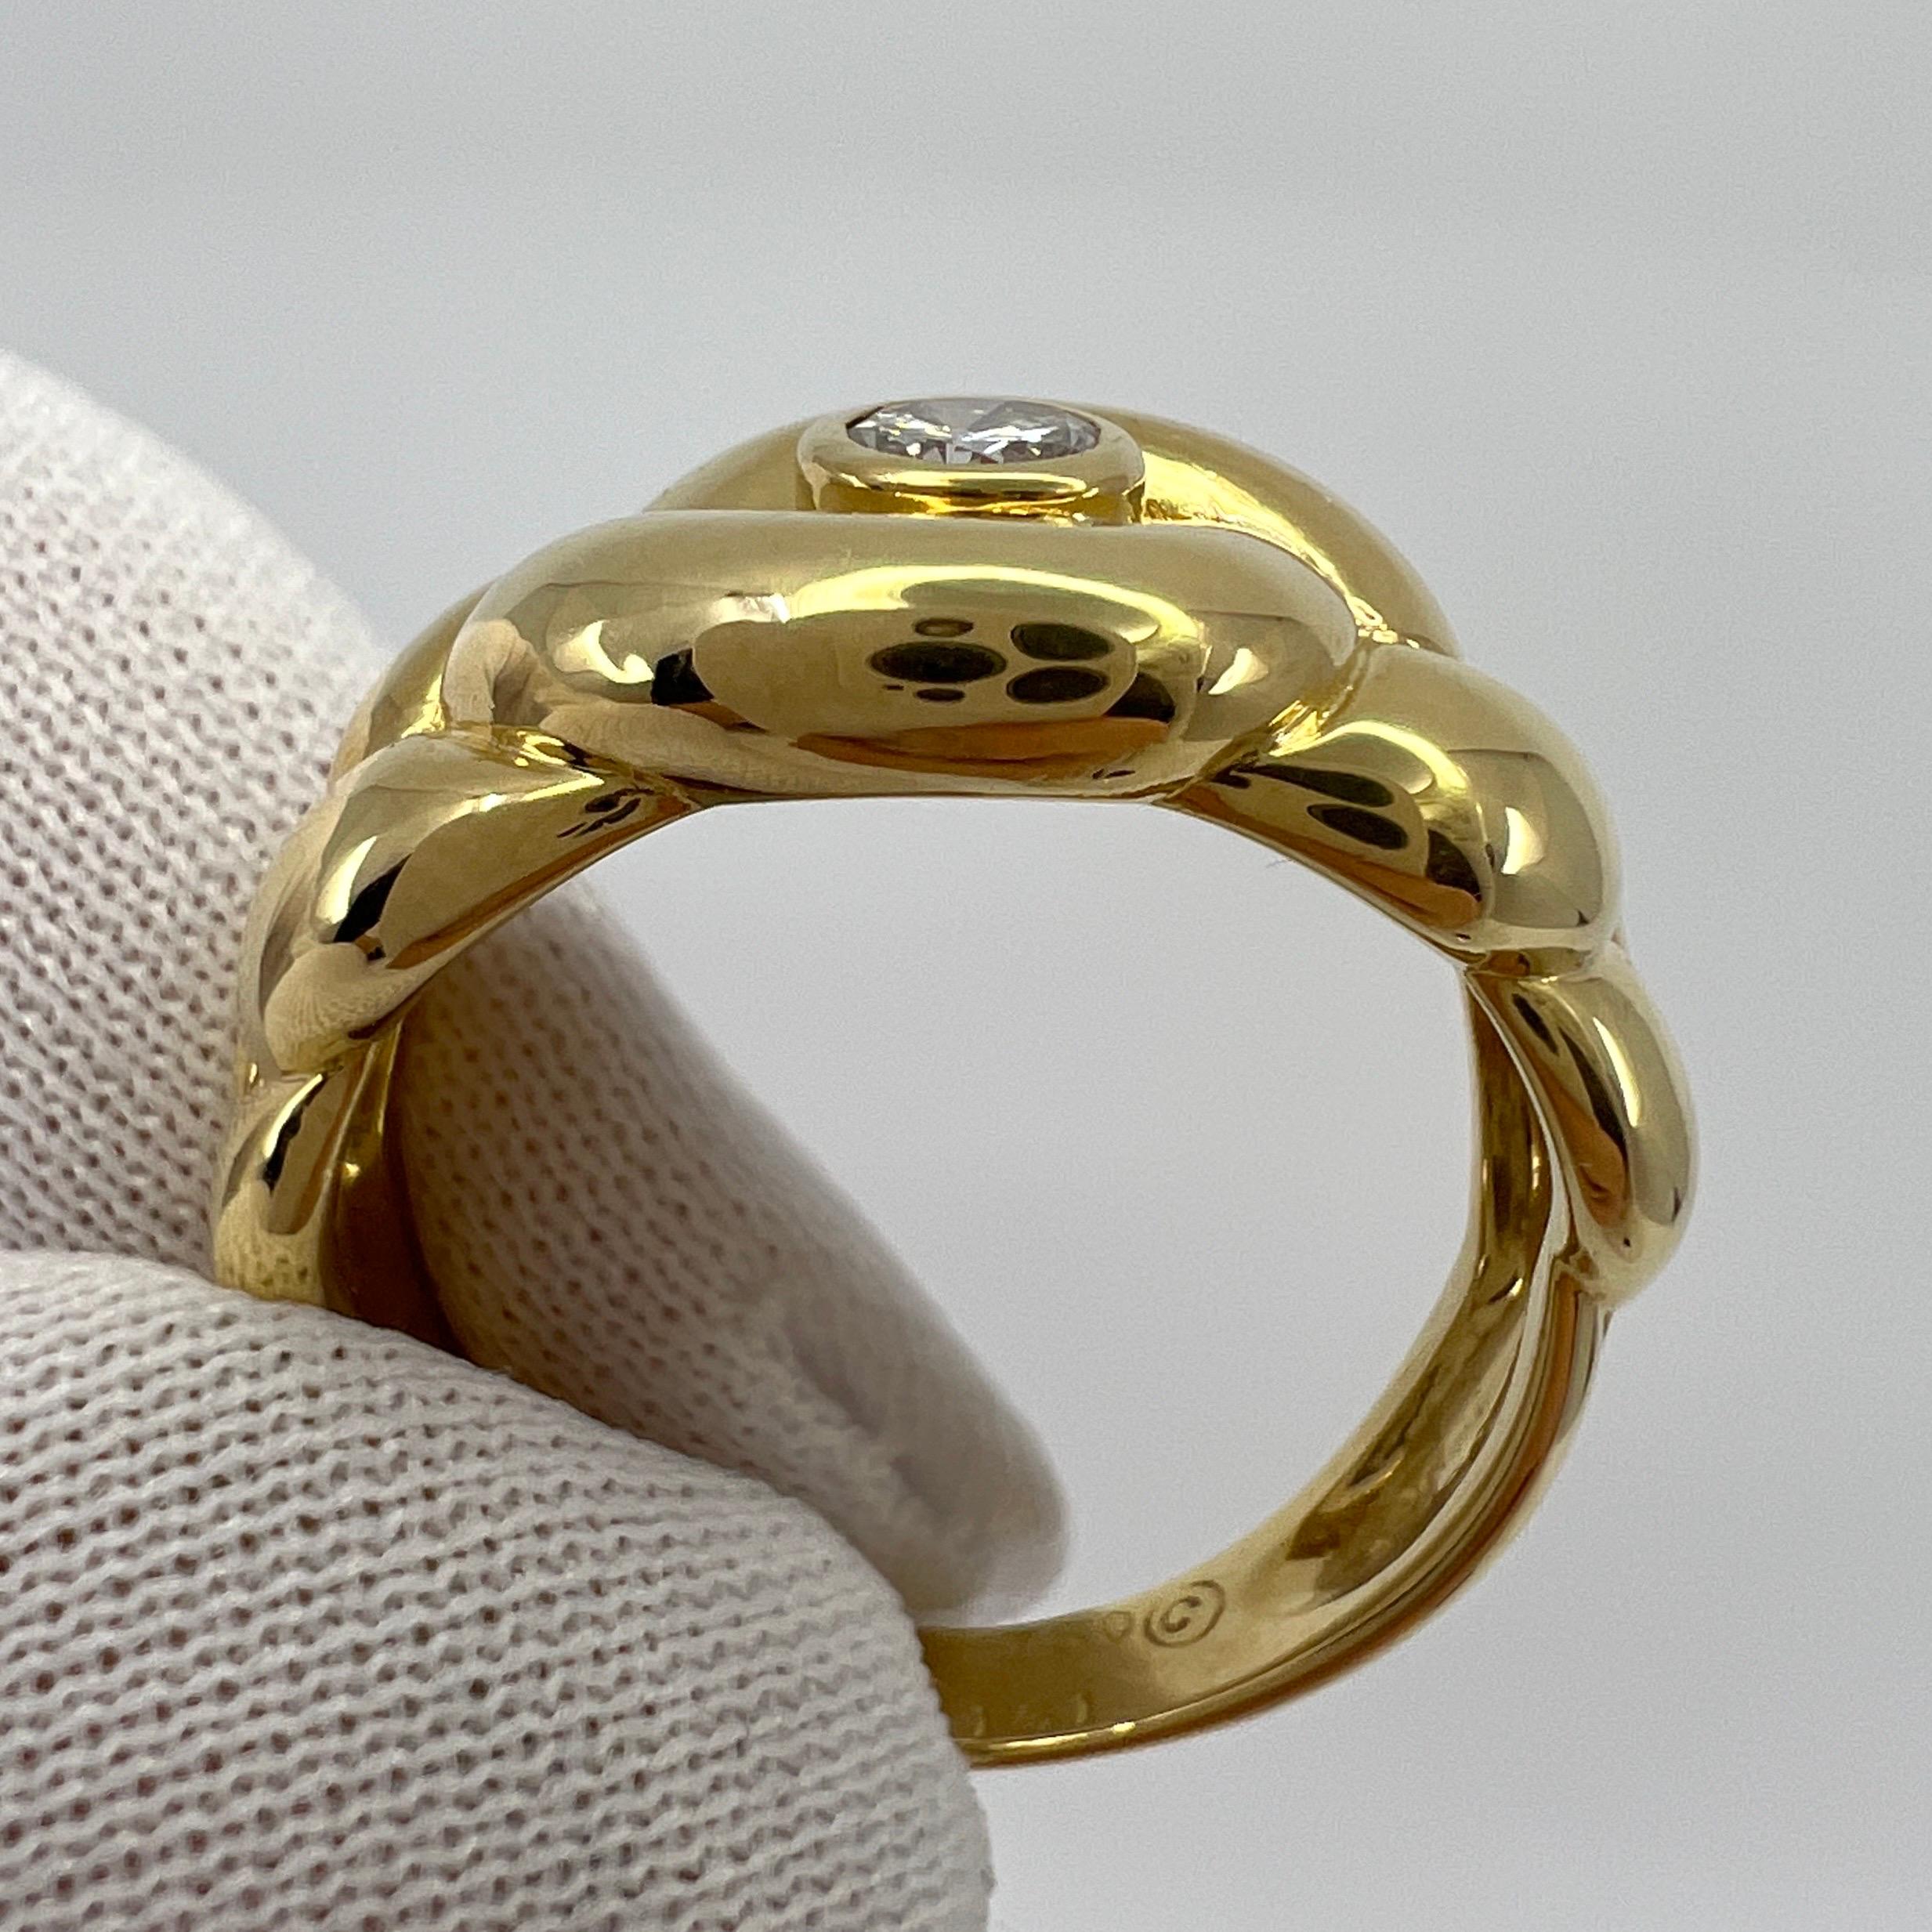 Rare Vintage Van Cleef & Arpels Diamond 18k Yellow Gold Braid Rope Ring with Box In Excellent Condition For Sale In Birmingham, GB